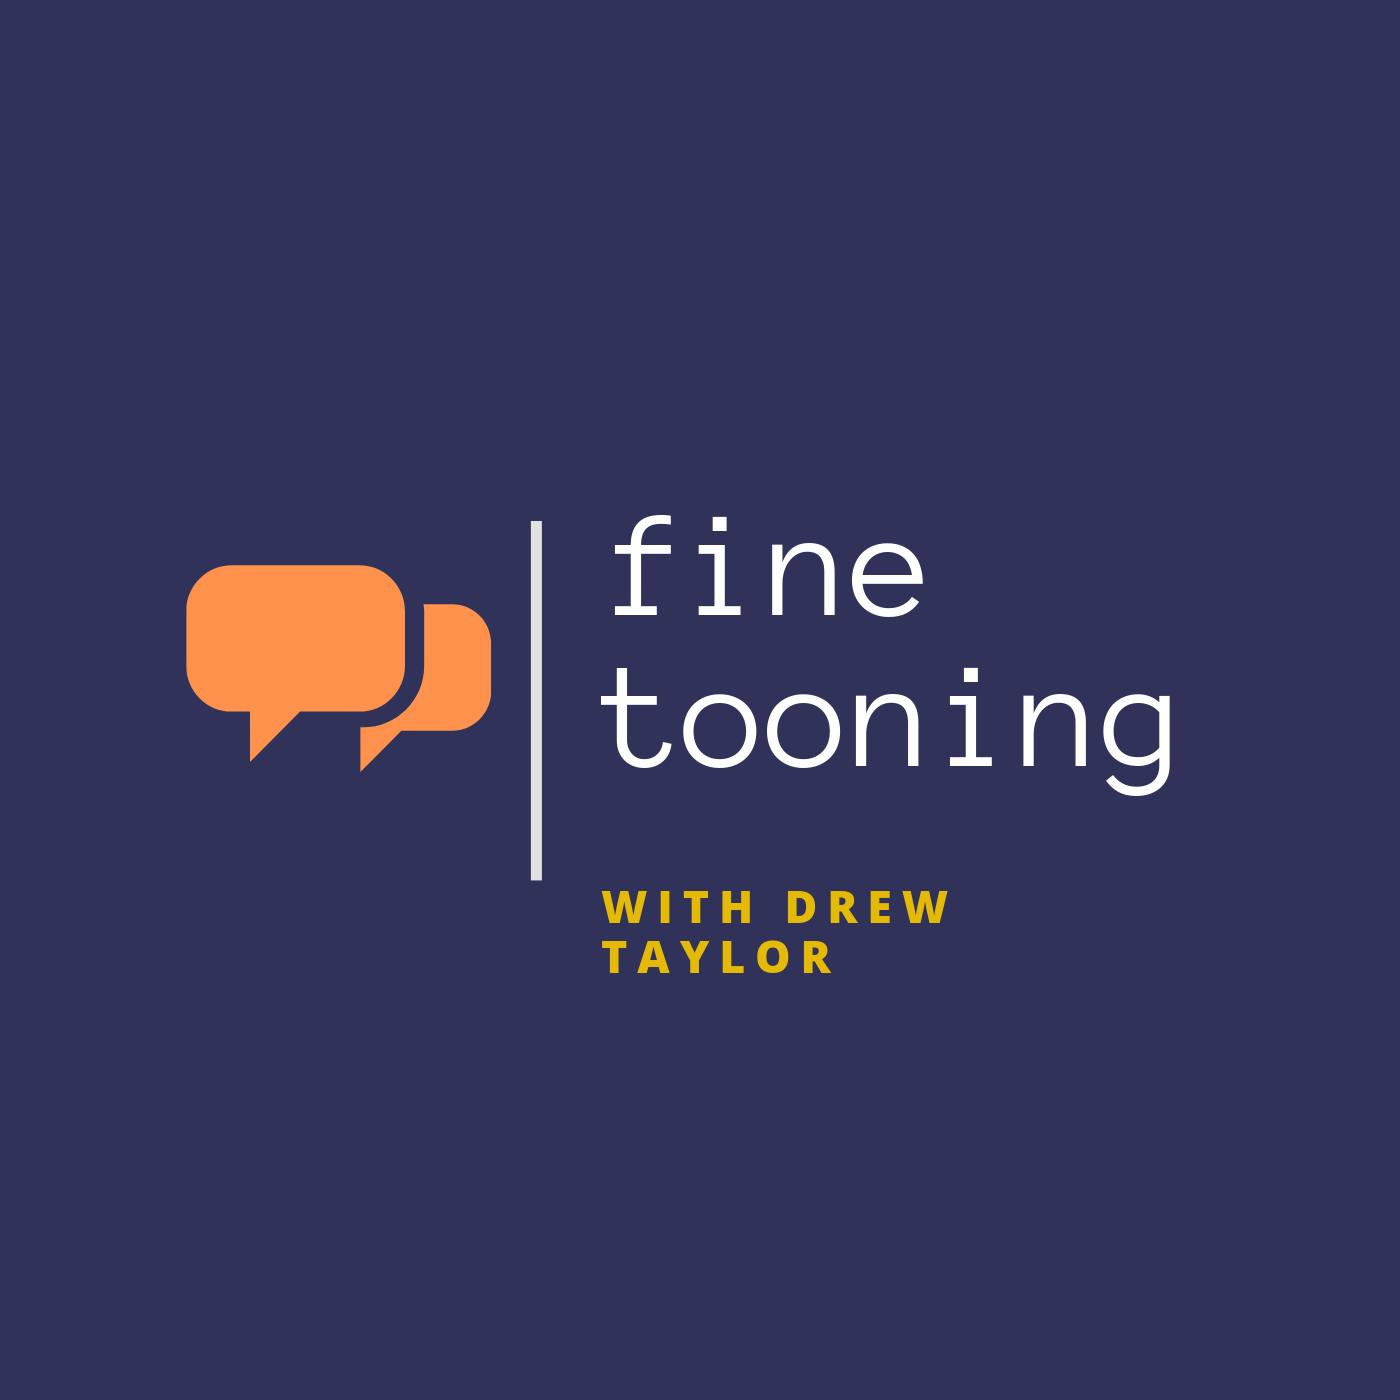 Fine Tooning with Drew Taylor Ep 425: Which animated features were released first by Disney Home Video